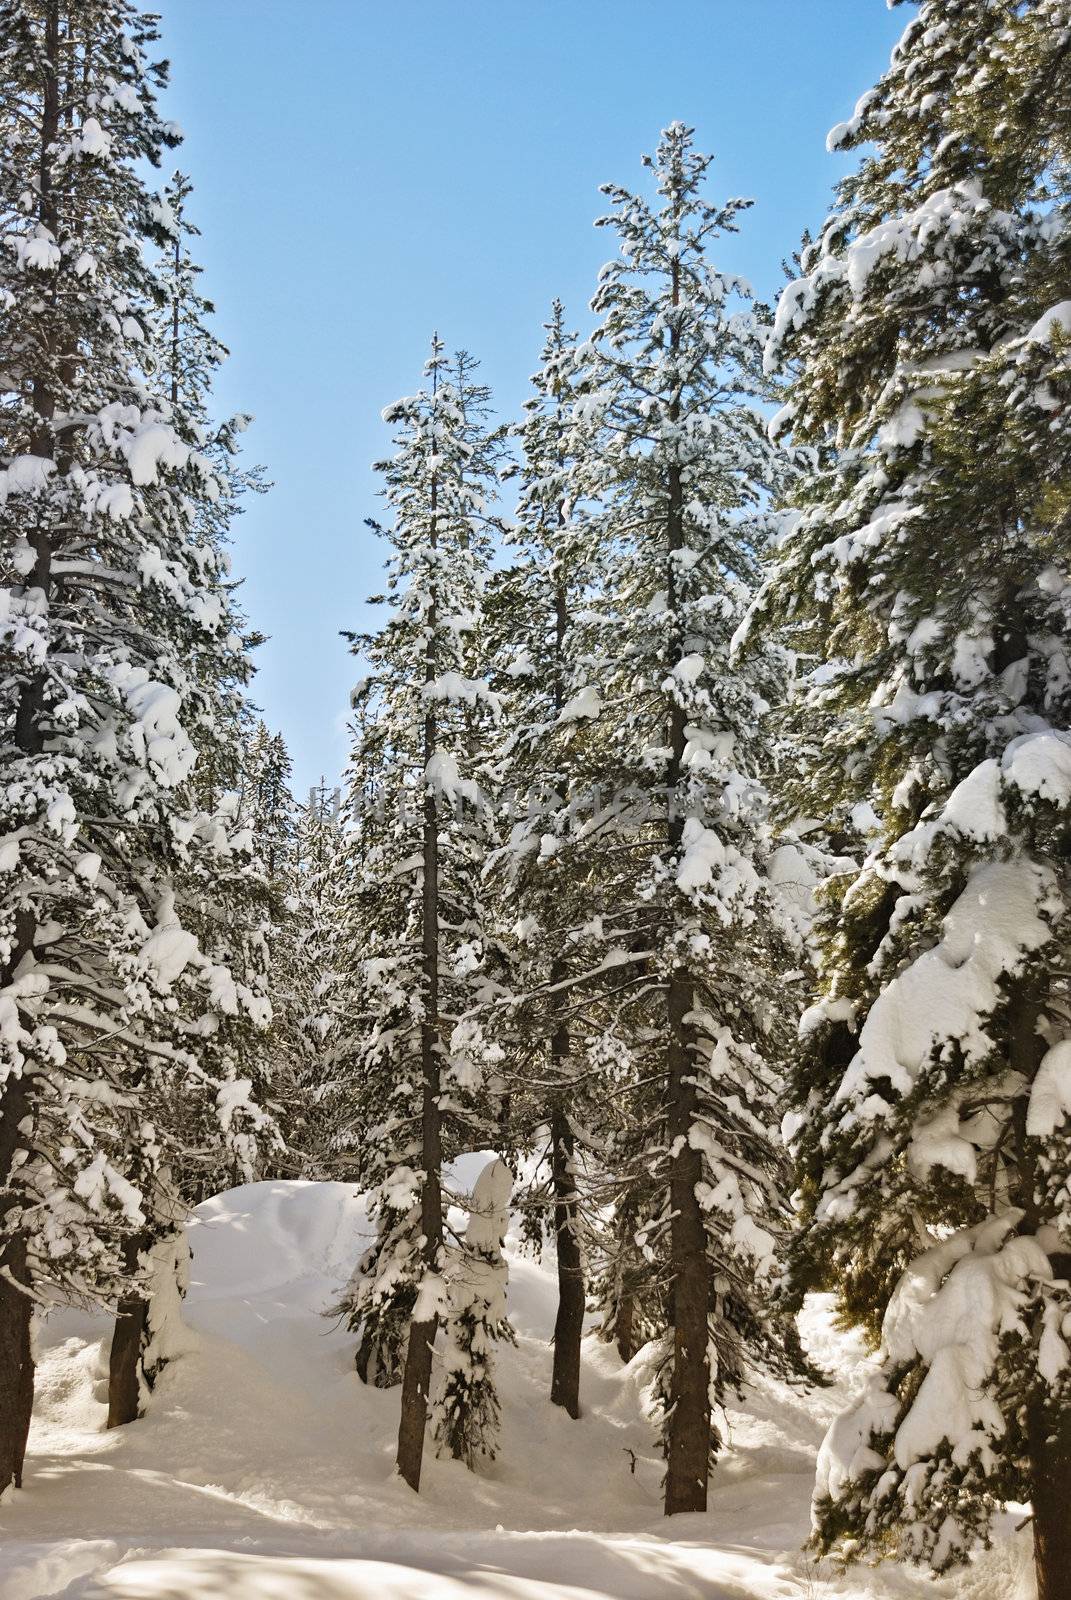 Sunny winter day among the conifers in the Lake Tahoe.